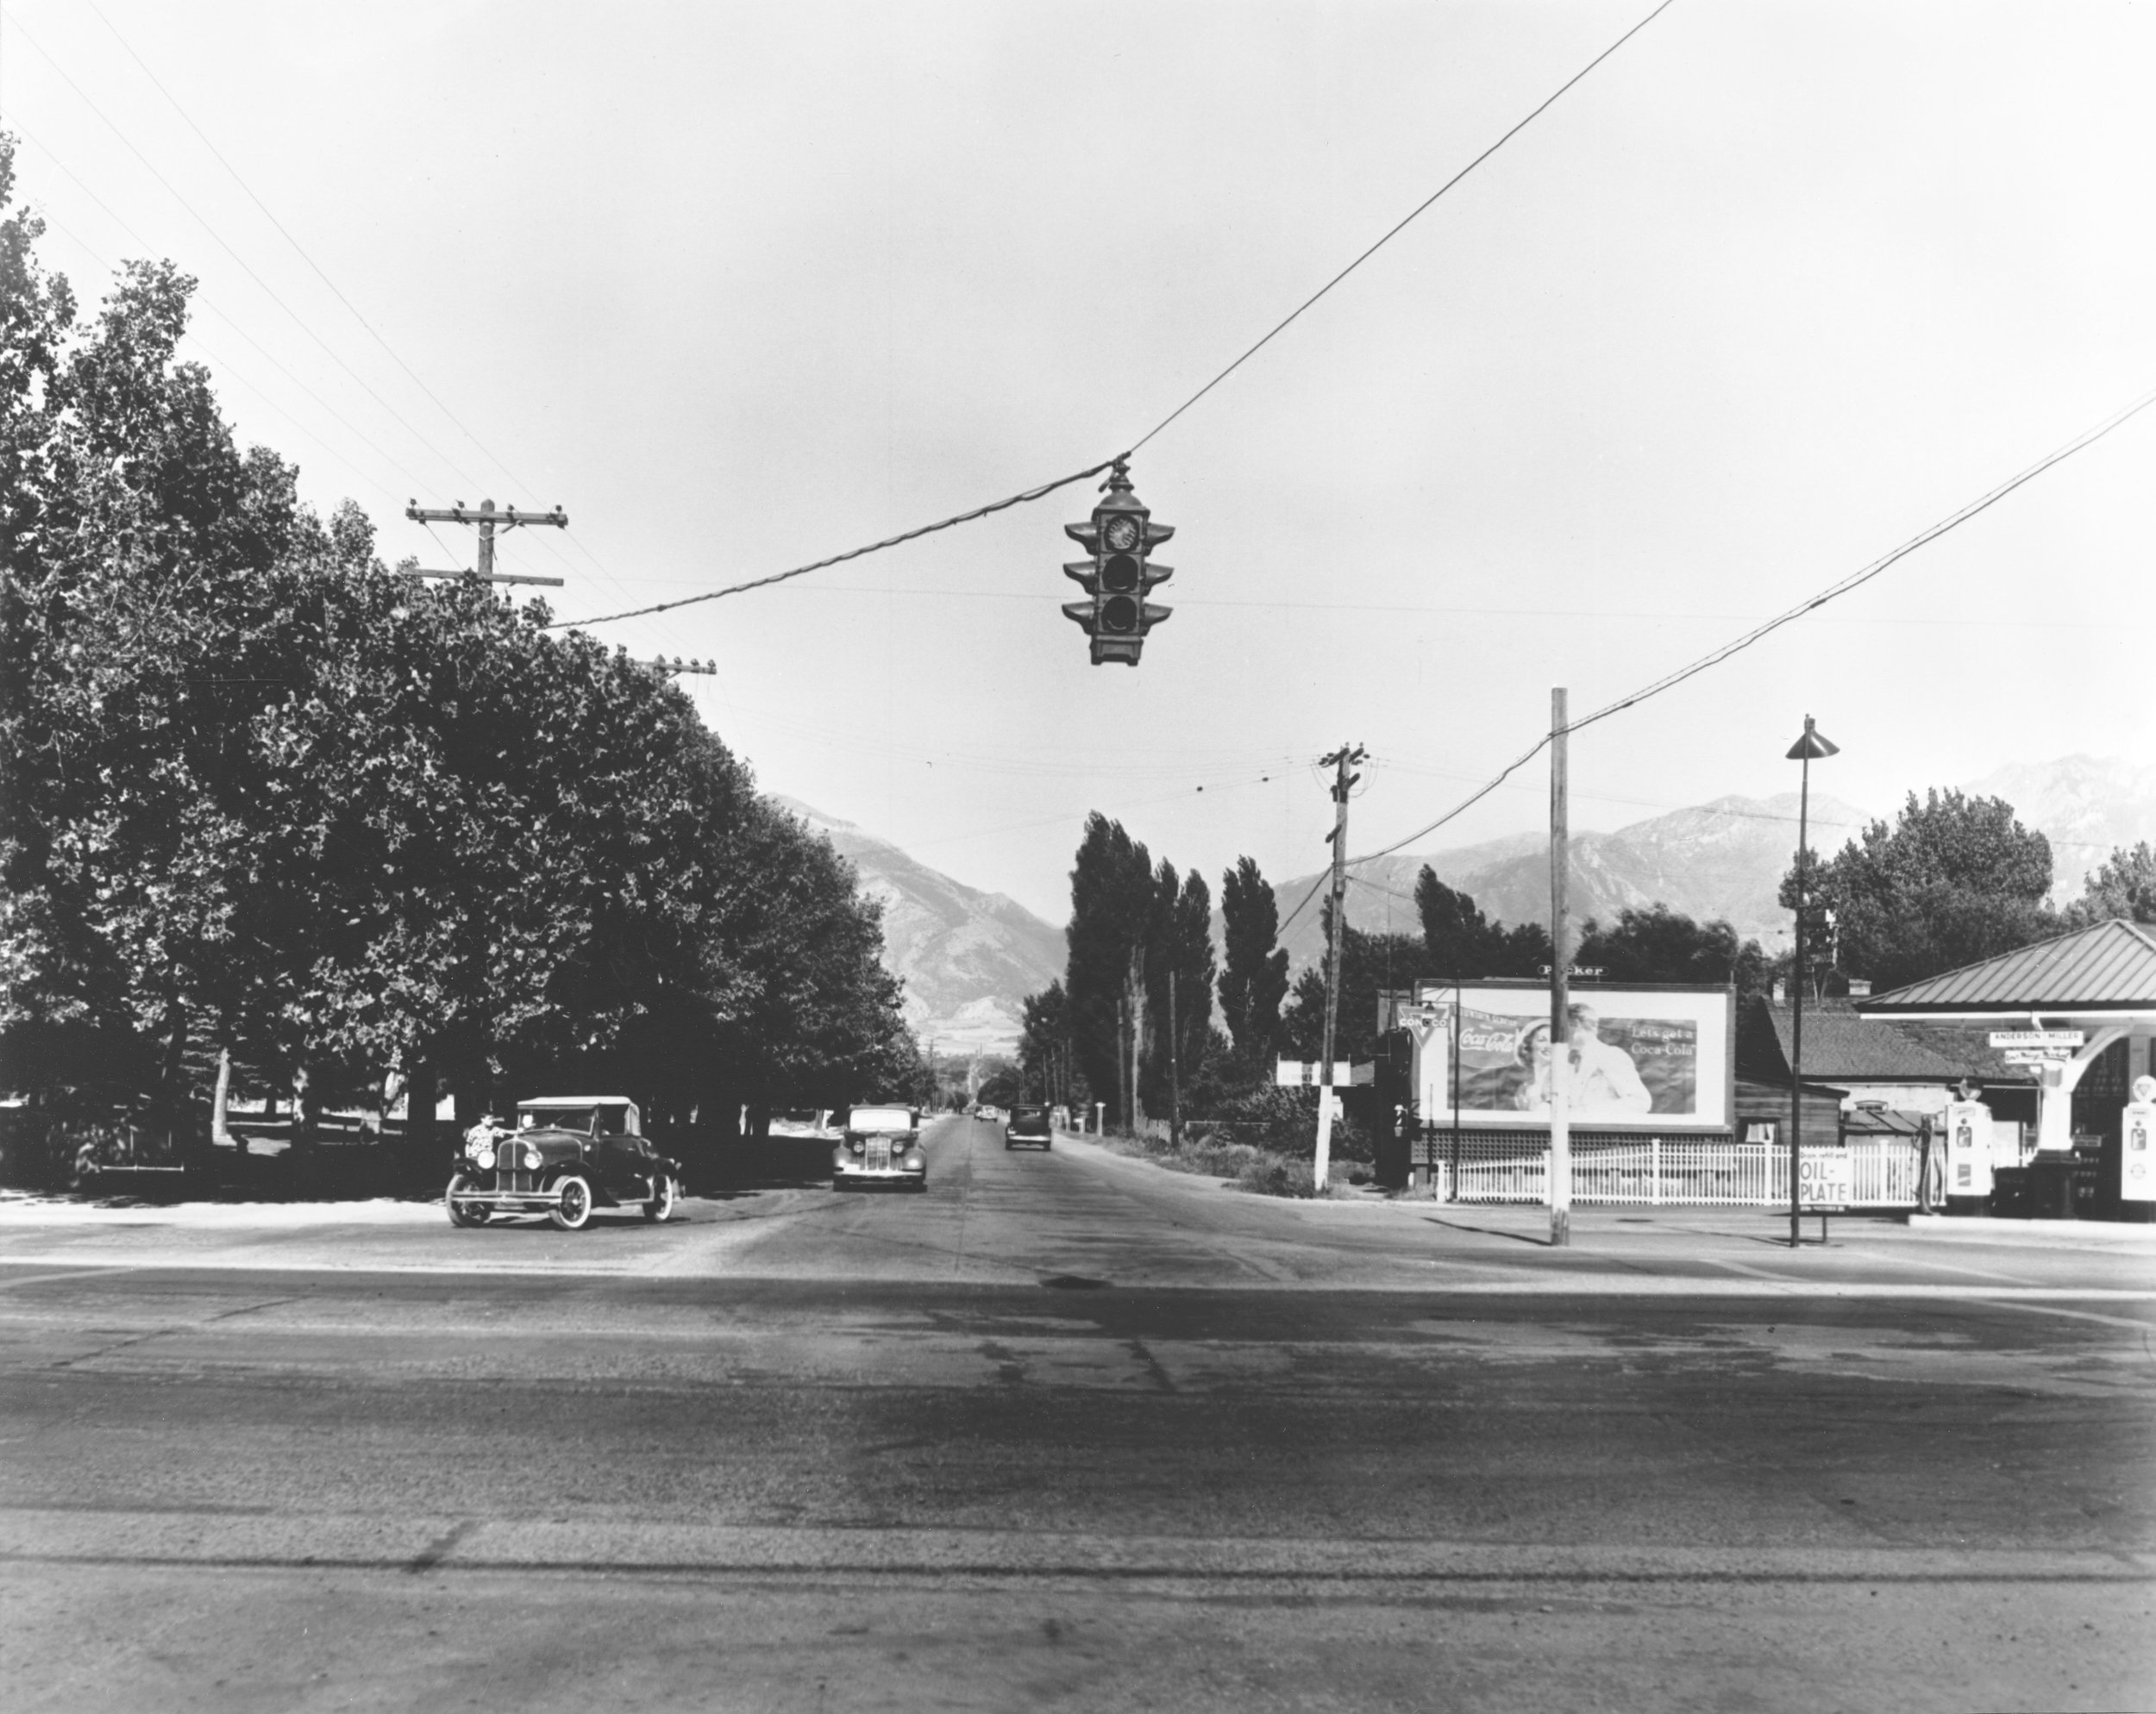 3300 S State, Date unknown